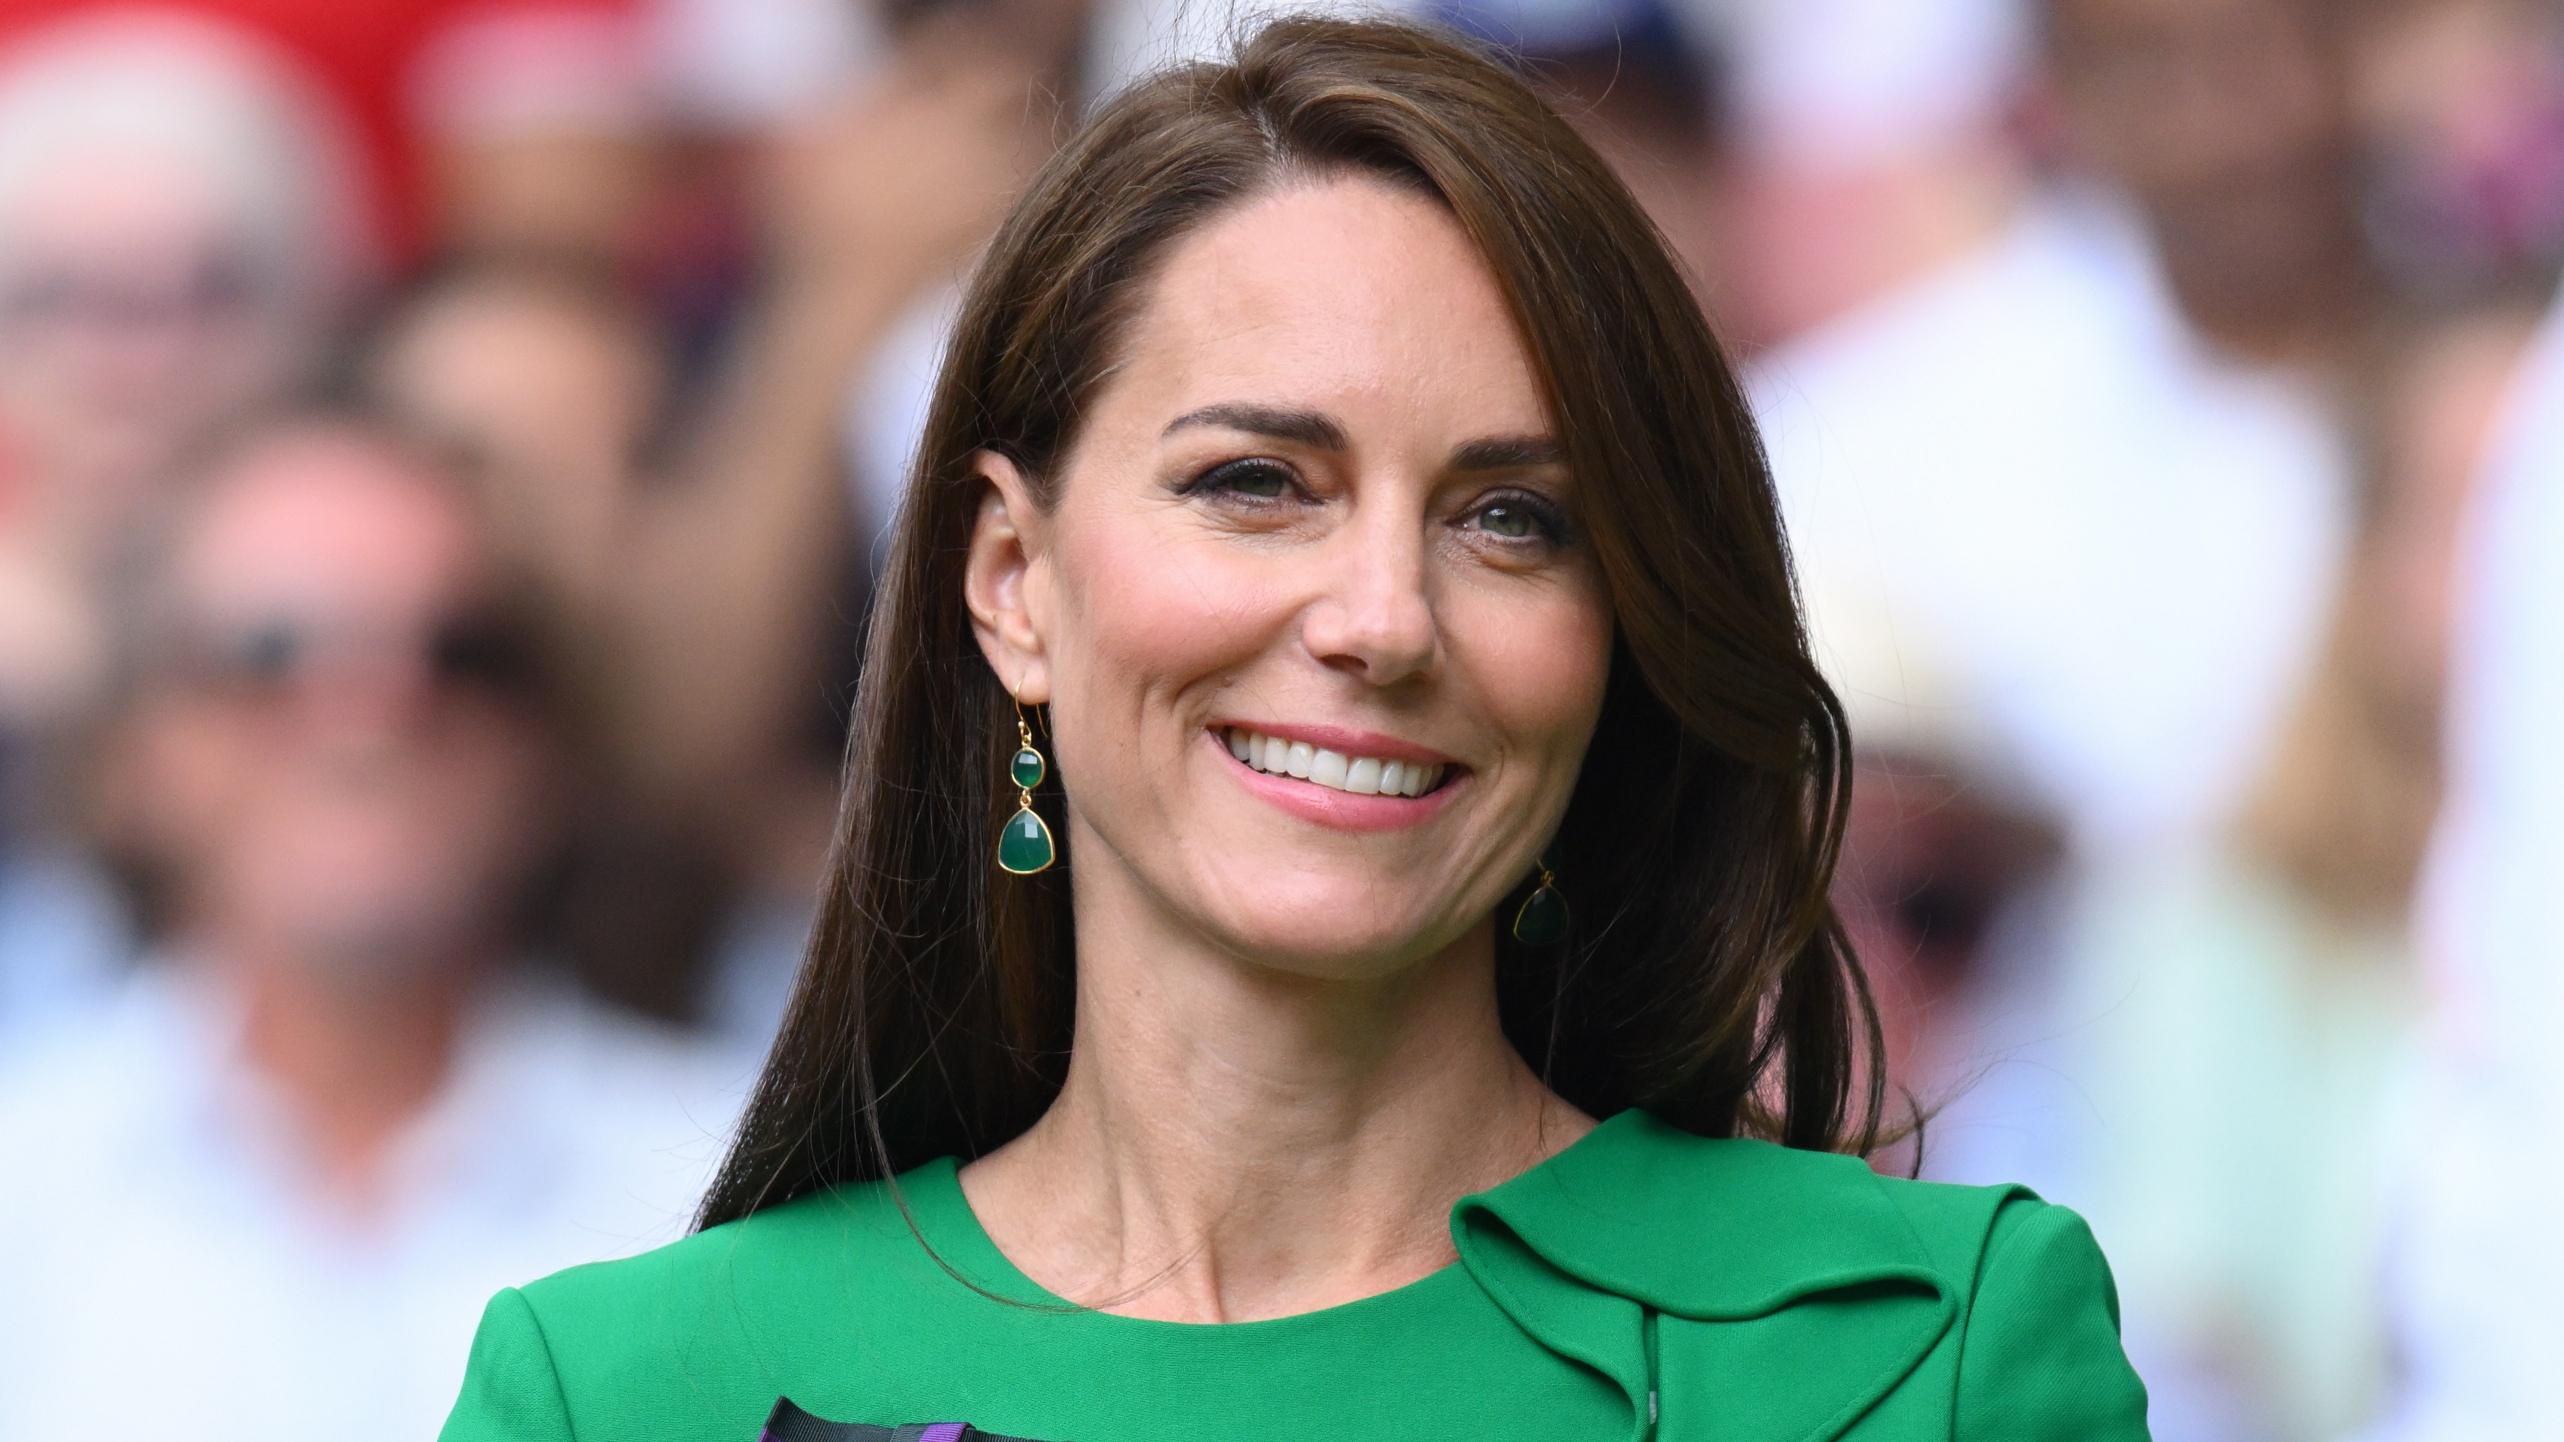 Kate Middleton's 'most carried clutch bag' honours 'London-based